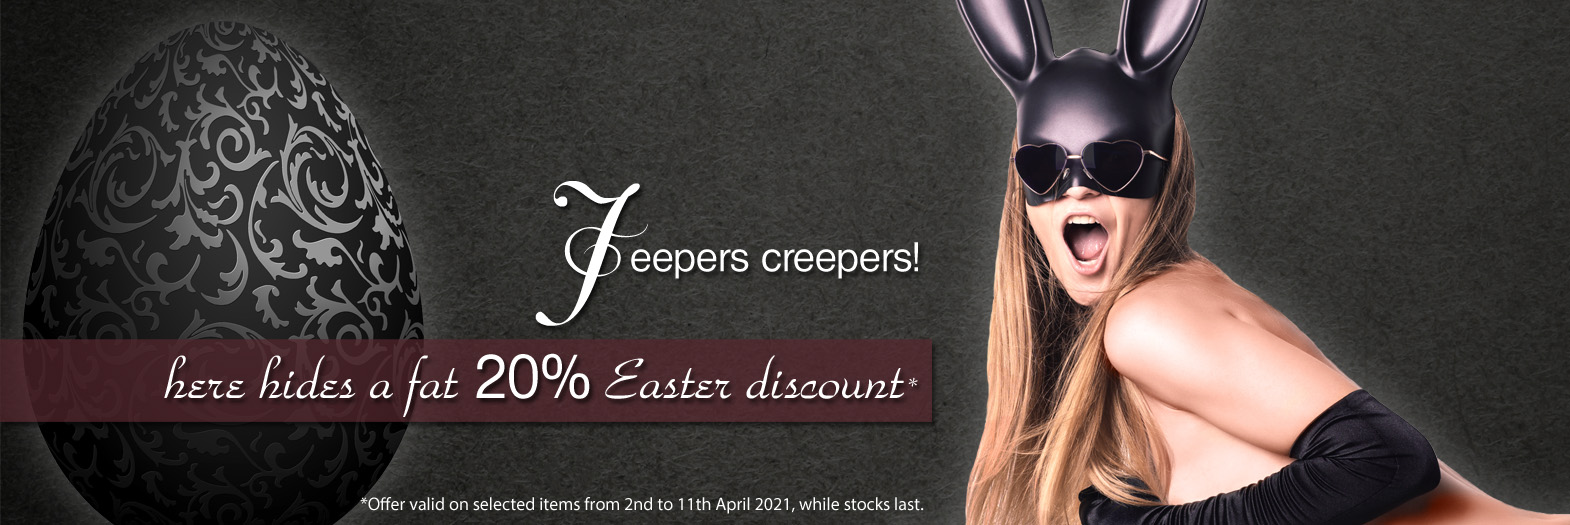 20 percent Easter discount on hip Gothic fashion from brands like PUNK RAVE and KILLSTAR